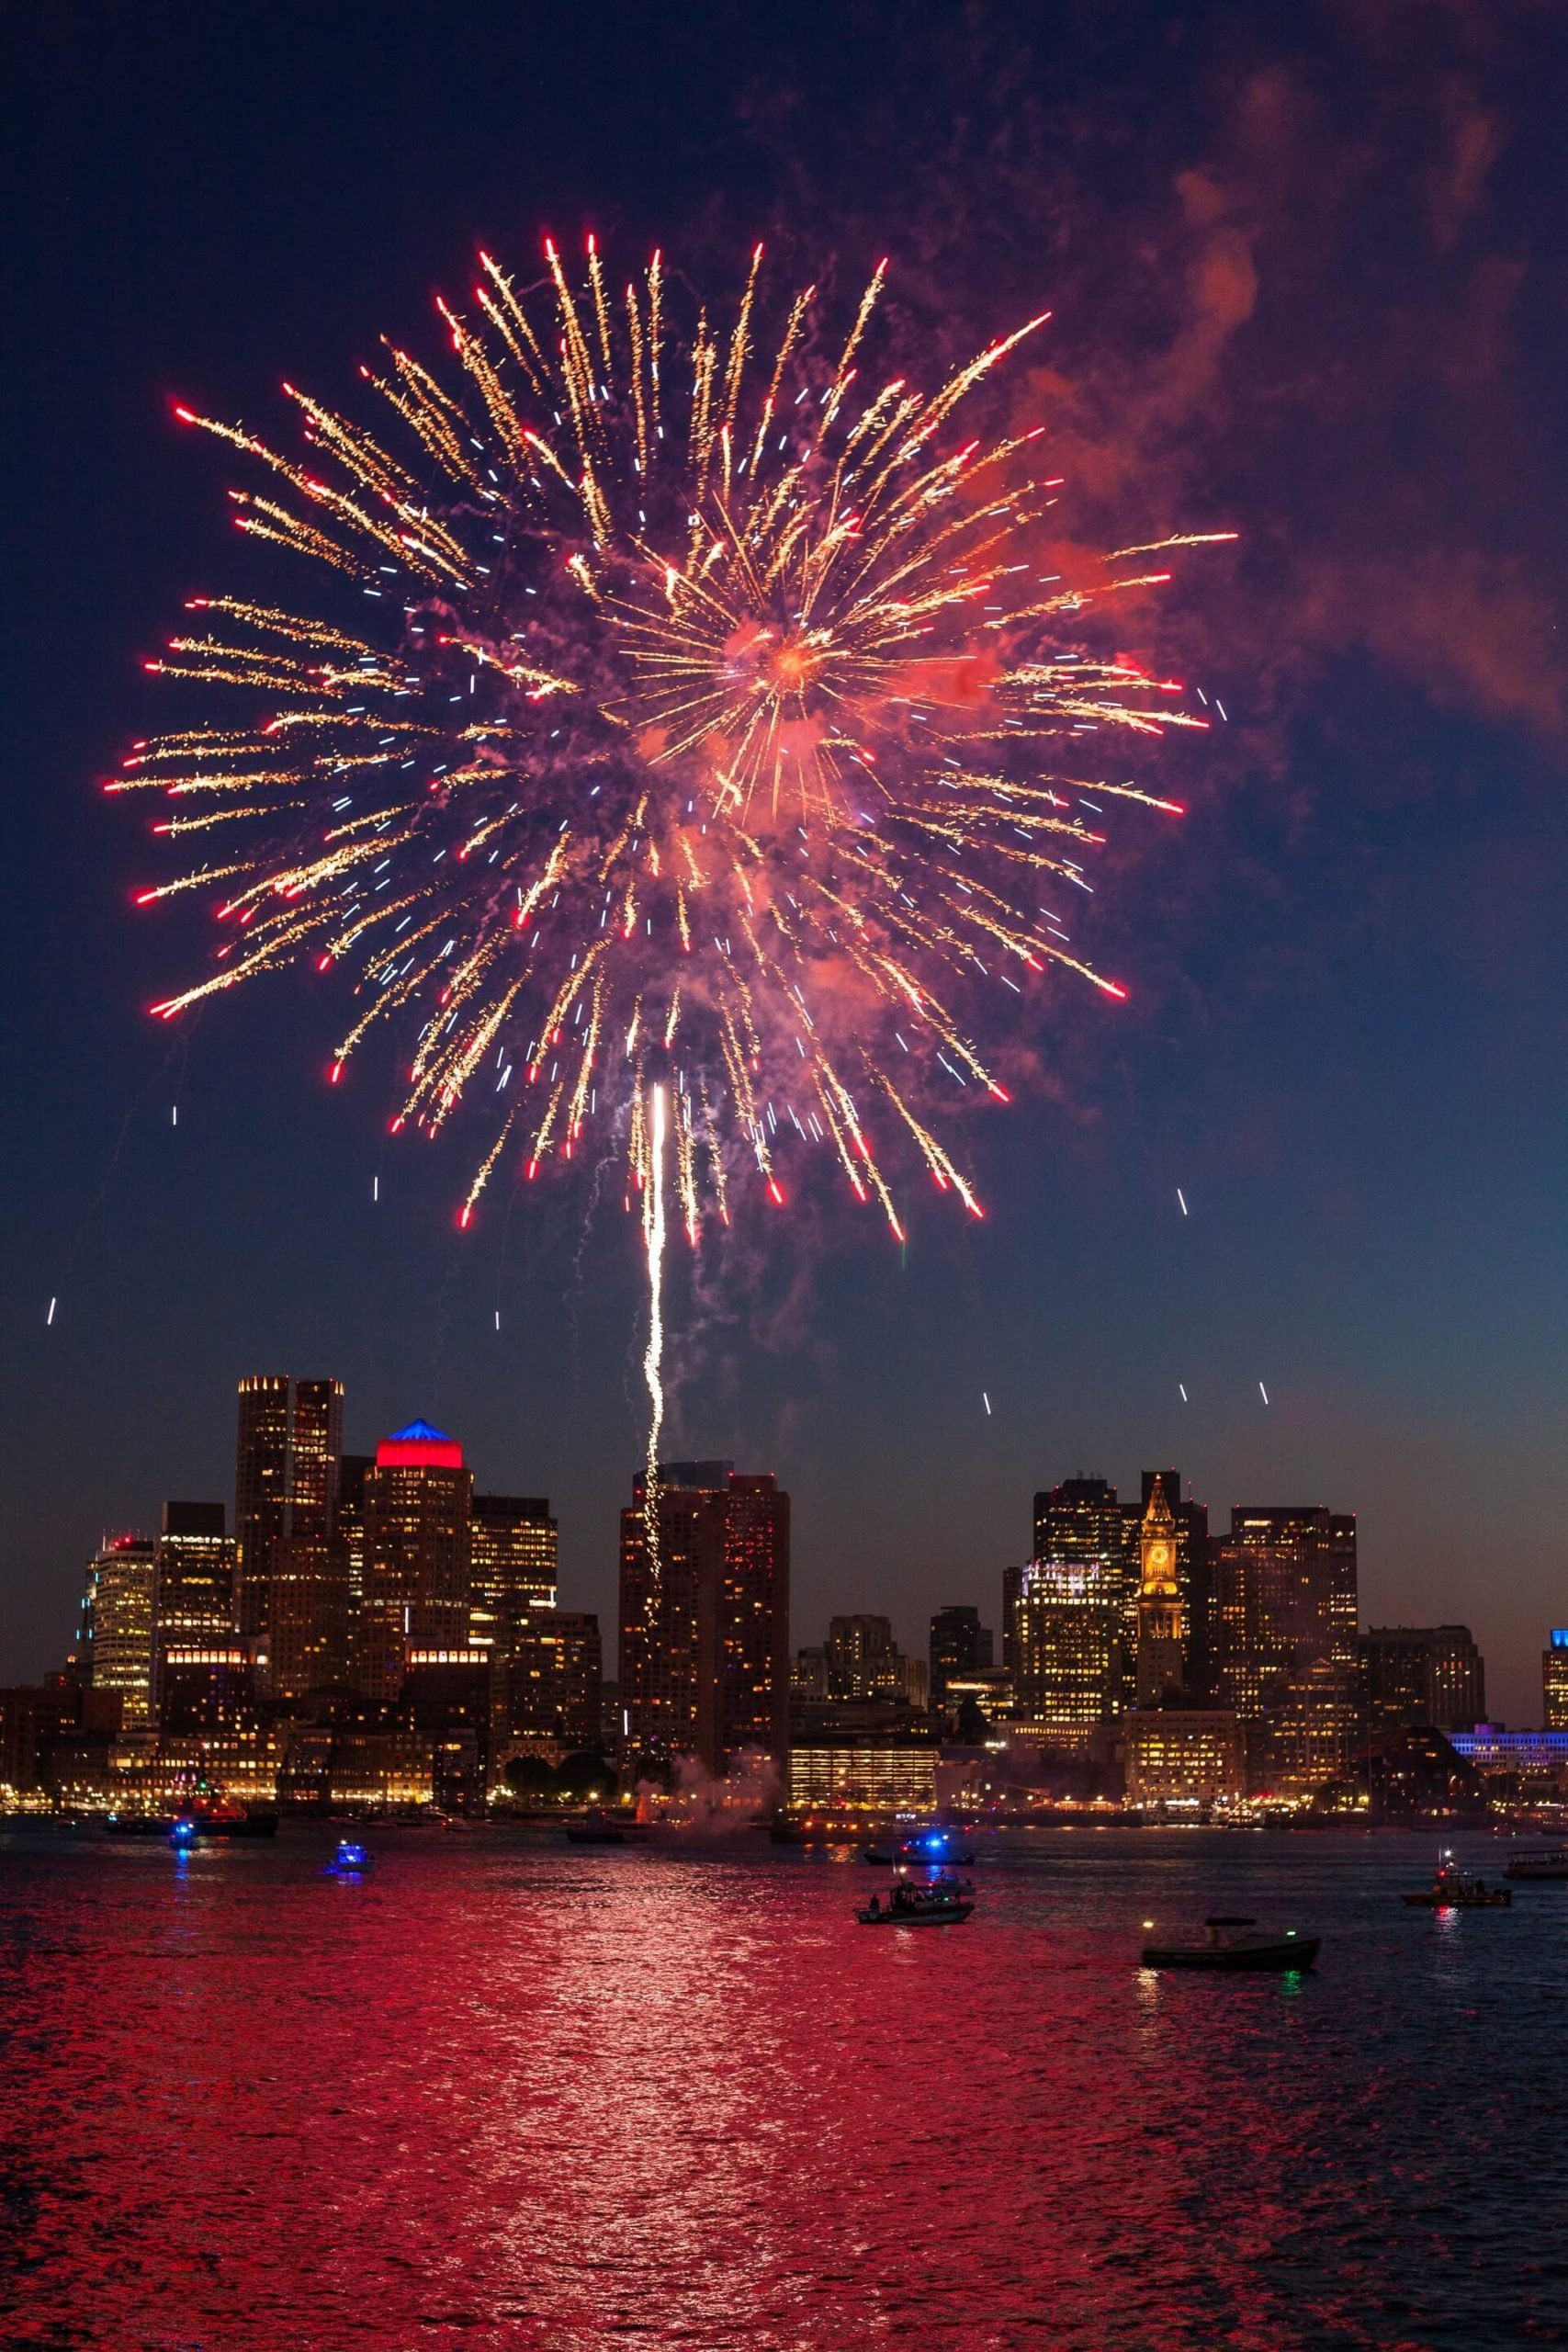 boats in water and fireworks in sky boston travel guide